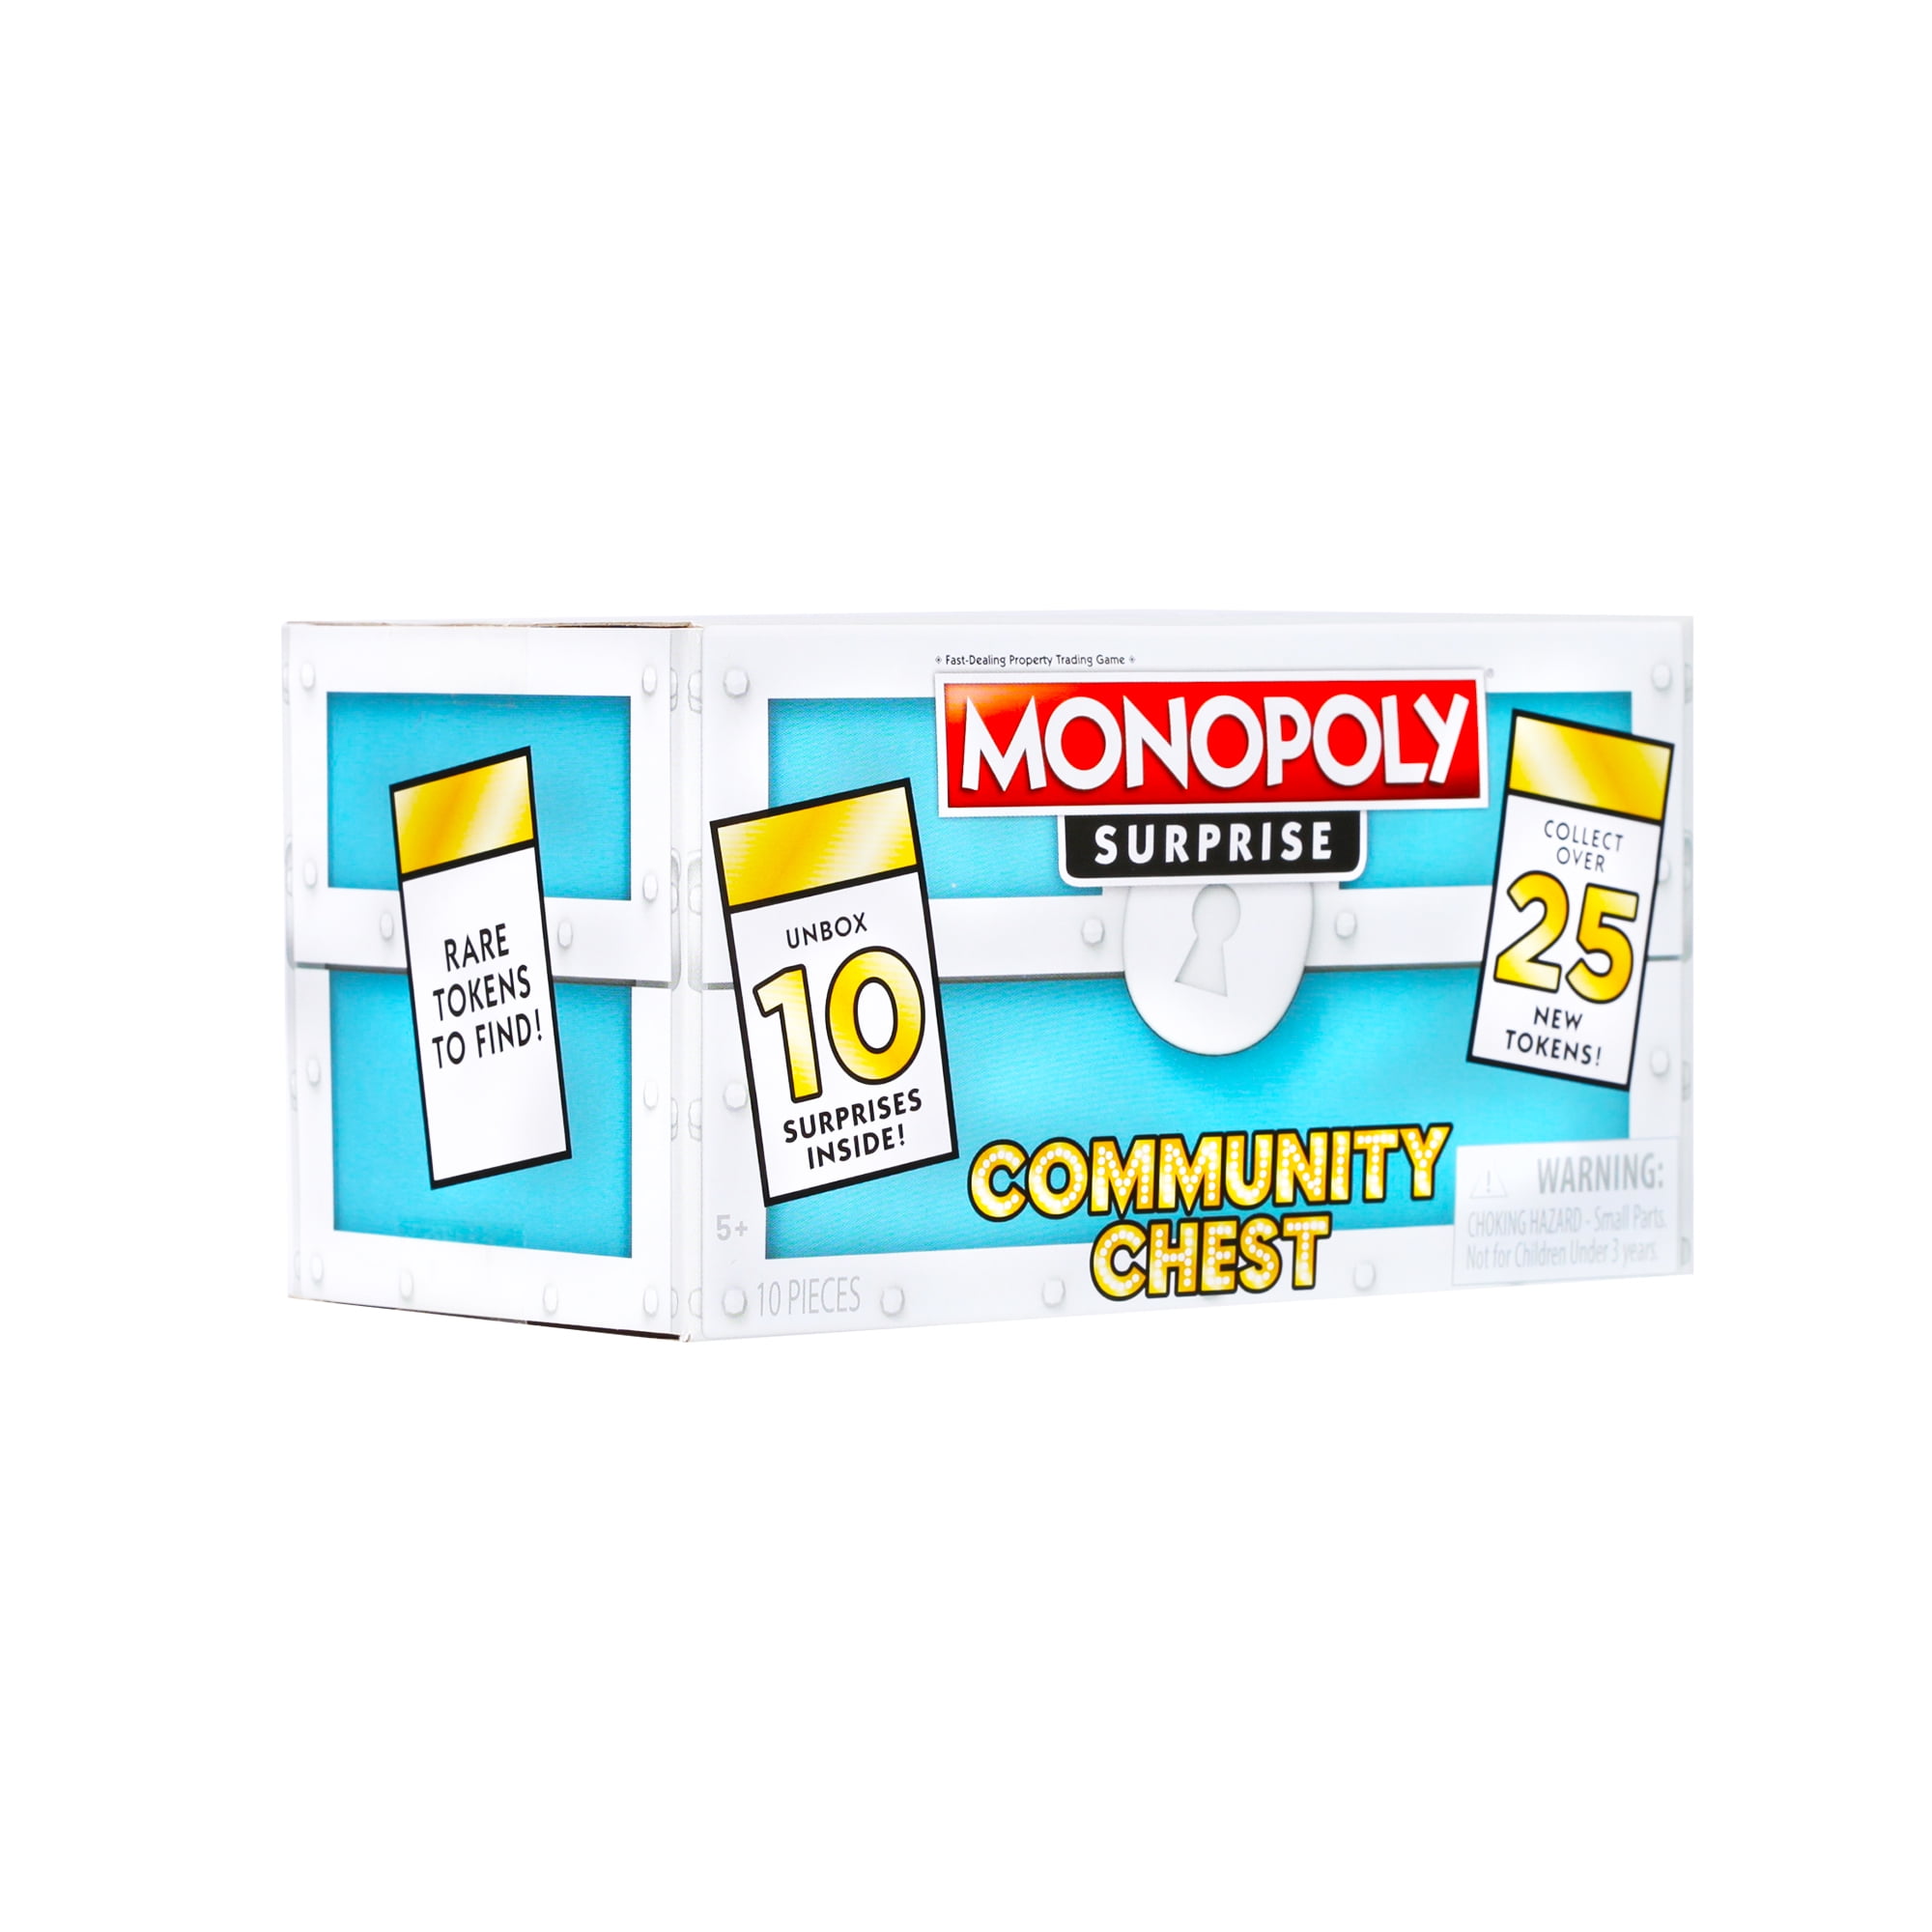 BOX Monopoly Surprise Exclusive Collectible Tokens LOT of 16 Boxes New 